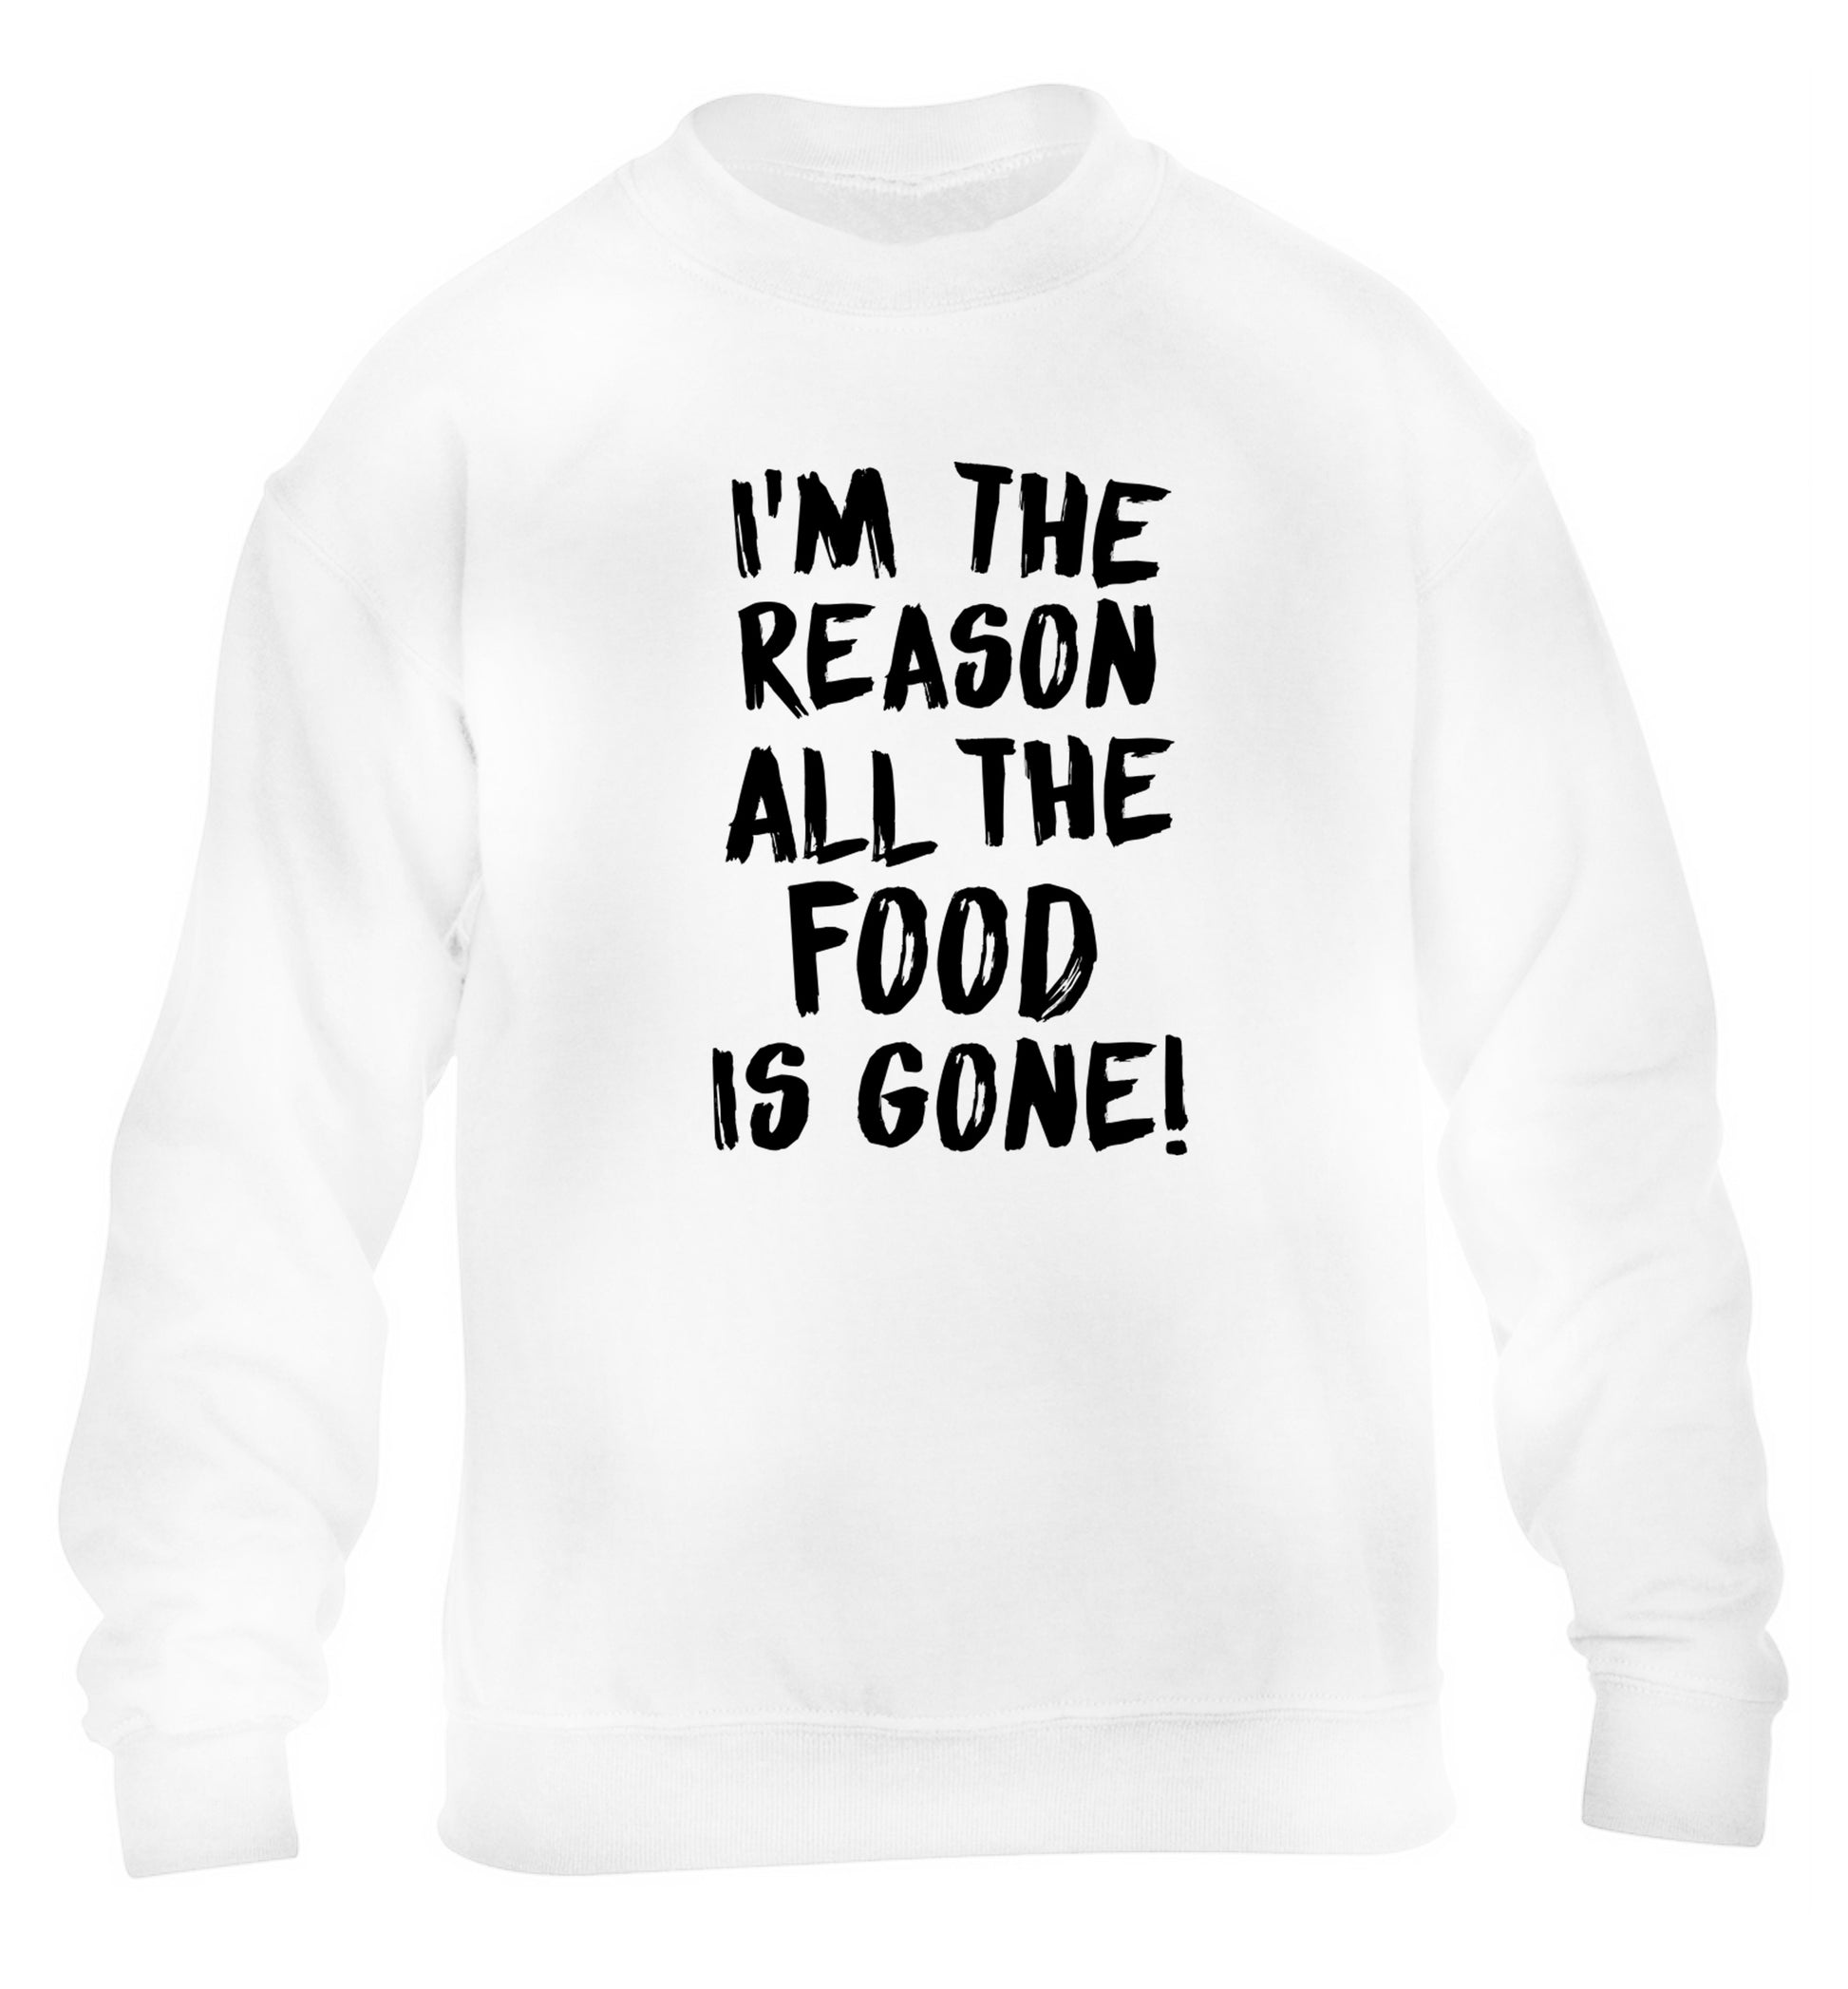 I'm the reason why all the food is gone children's white sweater 12-13 Years